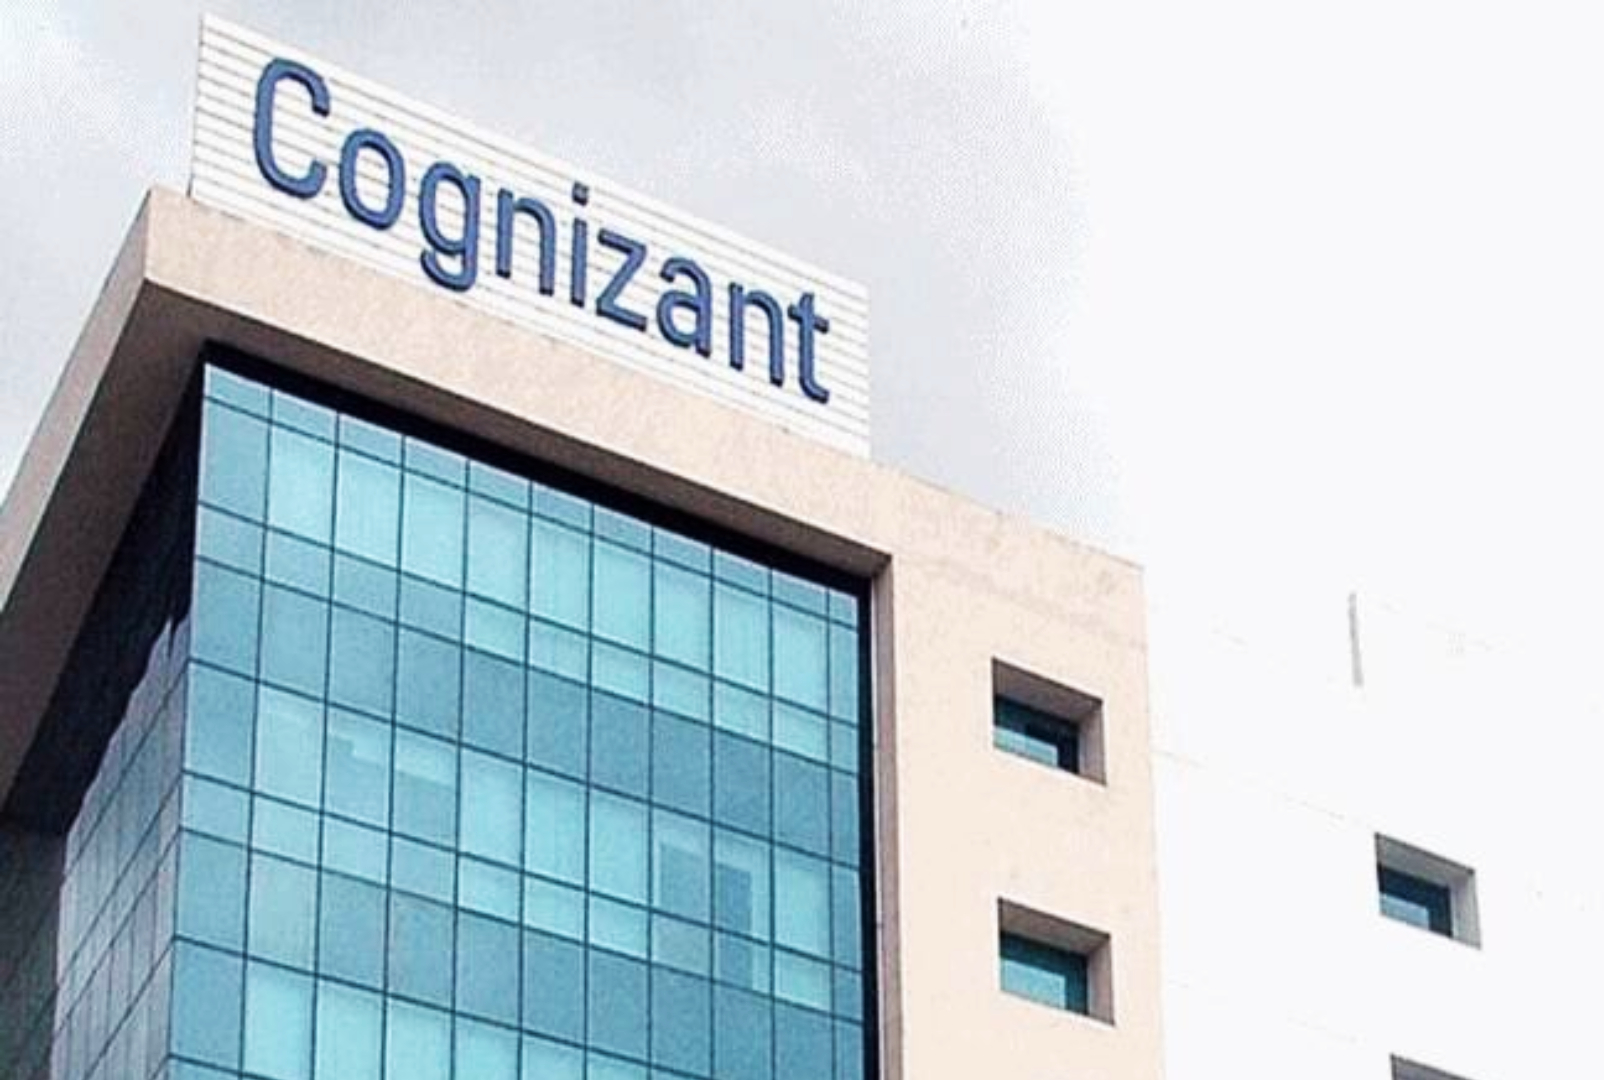 Jobs IT Major Cognizant To Hire 23000 Freshers From Campuses In 2021